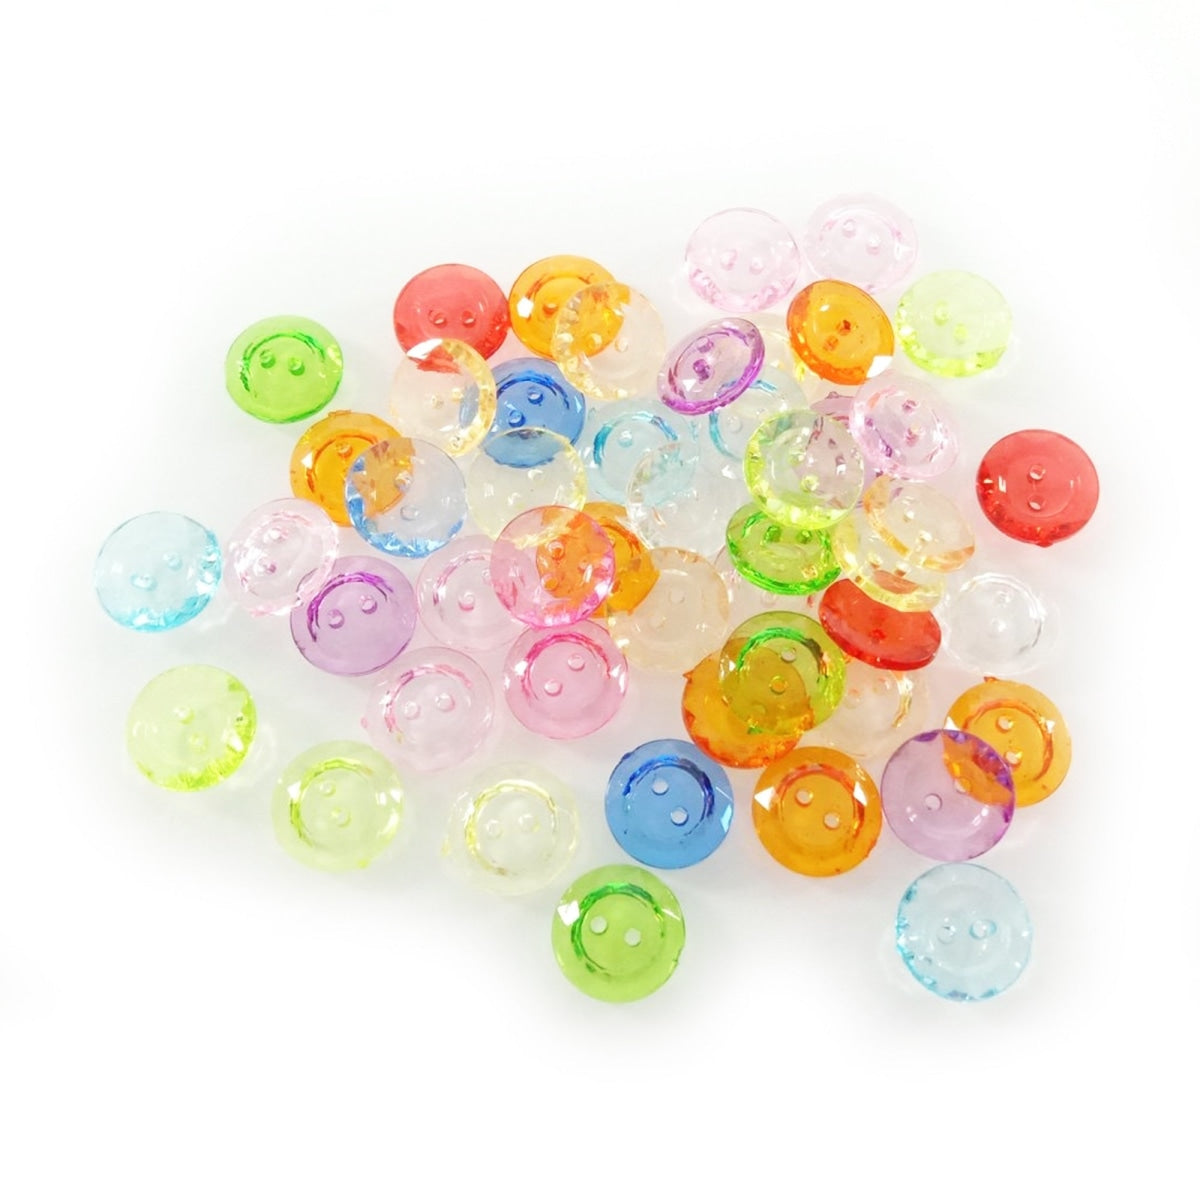 50Pcs 12Mm Mixed Colour Transparent Acrylic Buttons Apparel Sewing Accessories Diy Crafts Clothing